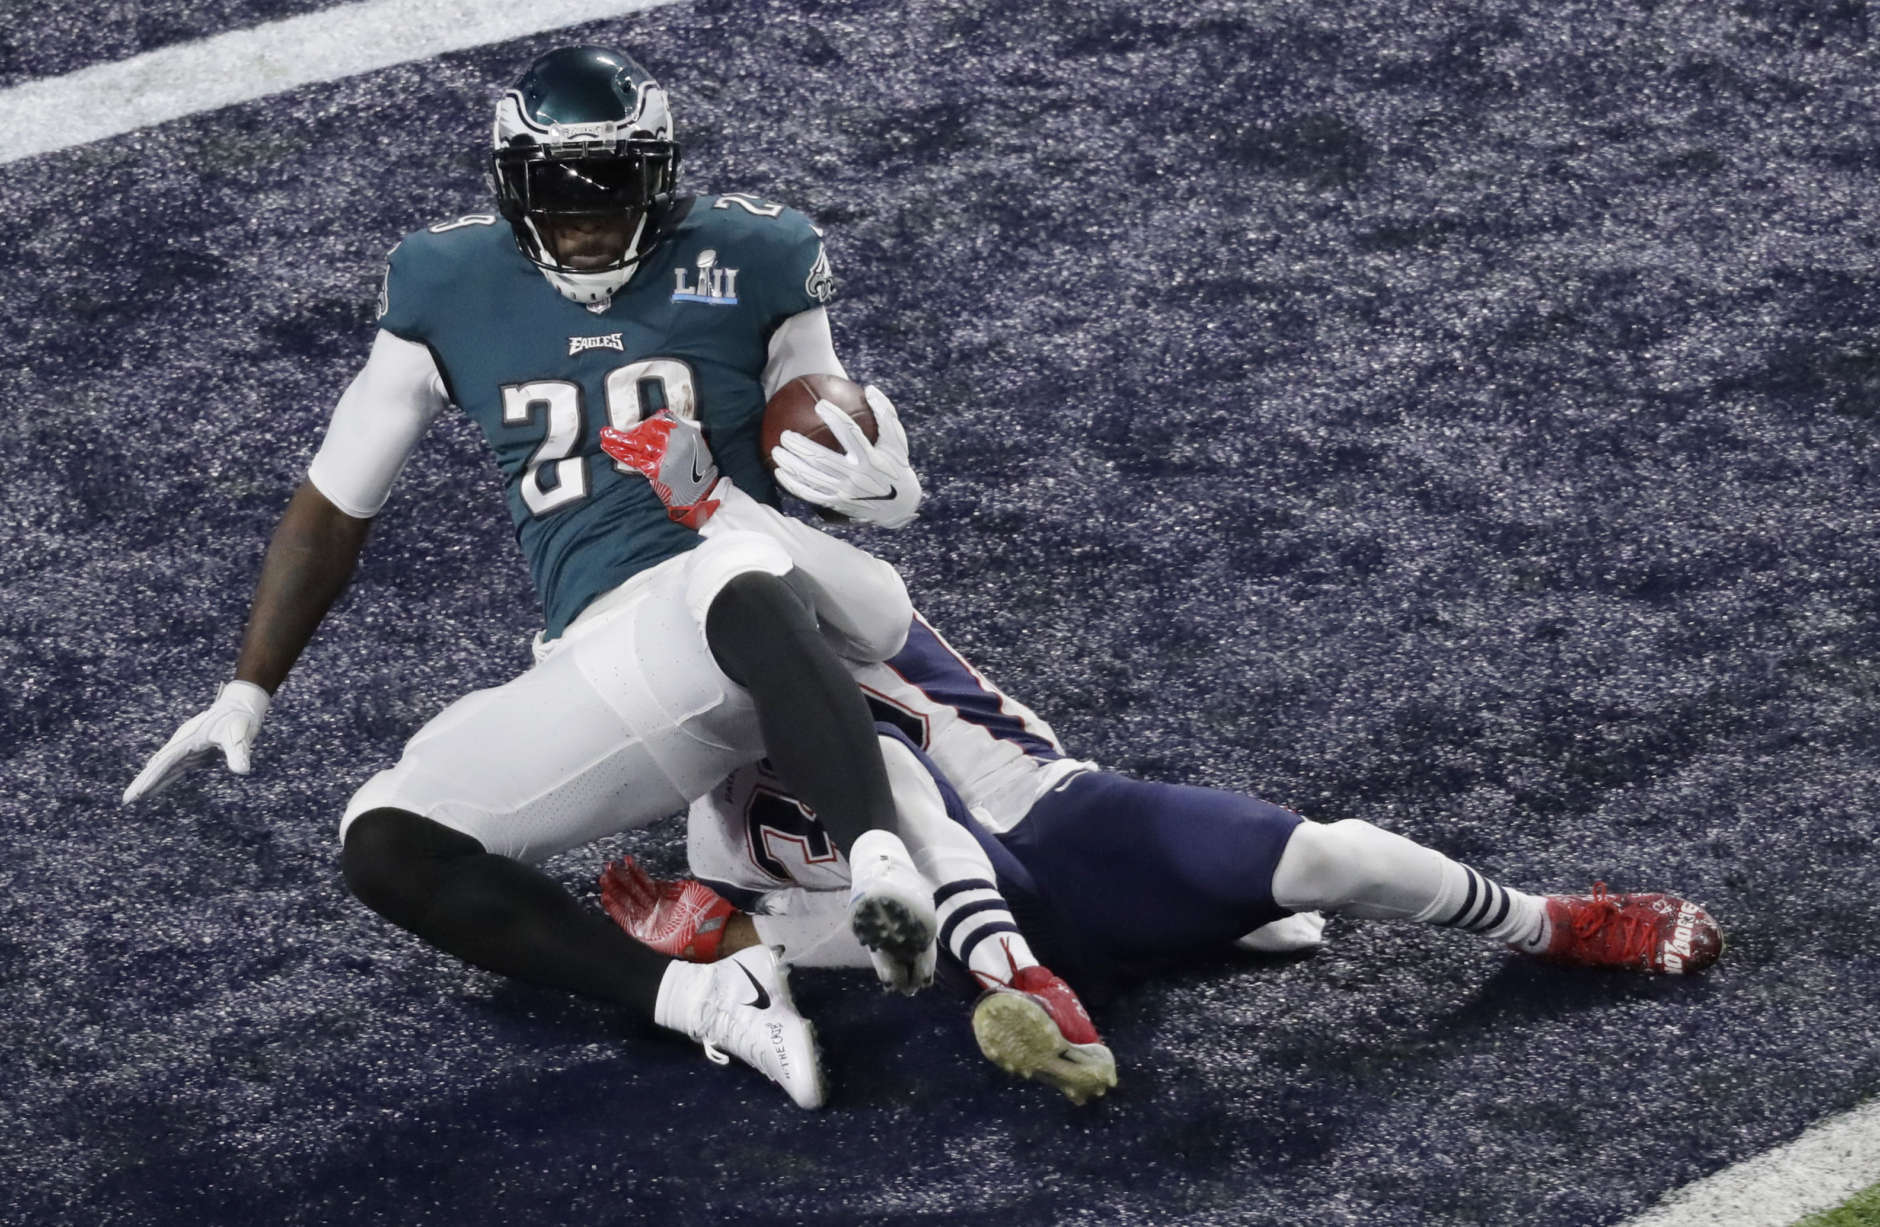 Philadelphia Eagles running back LeGarrette Blount, left, scores past New England Patriots strong safety Duron Harmon during the first half of the NFL Super Bowl 52 football game Sunday, Feb. 4, 2018, in Minneapolis.(AP Photo/Eric Gay)